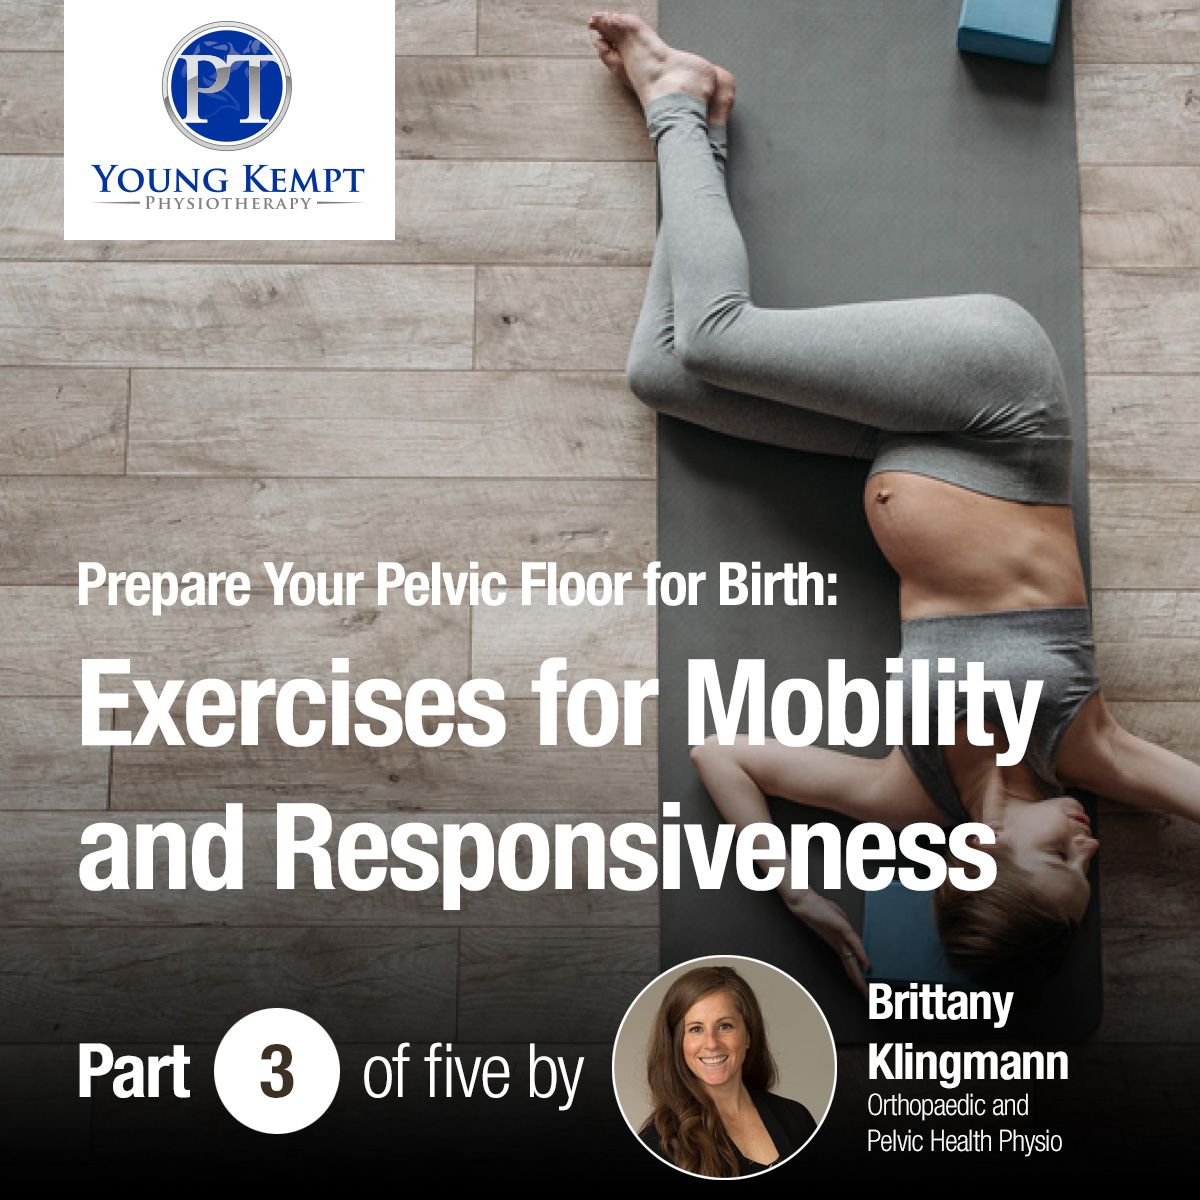 Prepare Your Pelvic Floor for Birth: Exercises for Mobility and Responsiveness